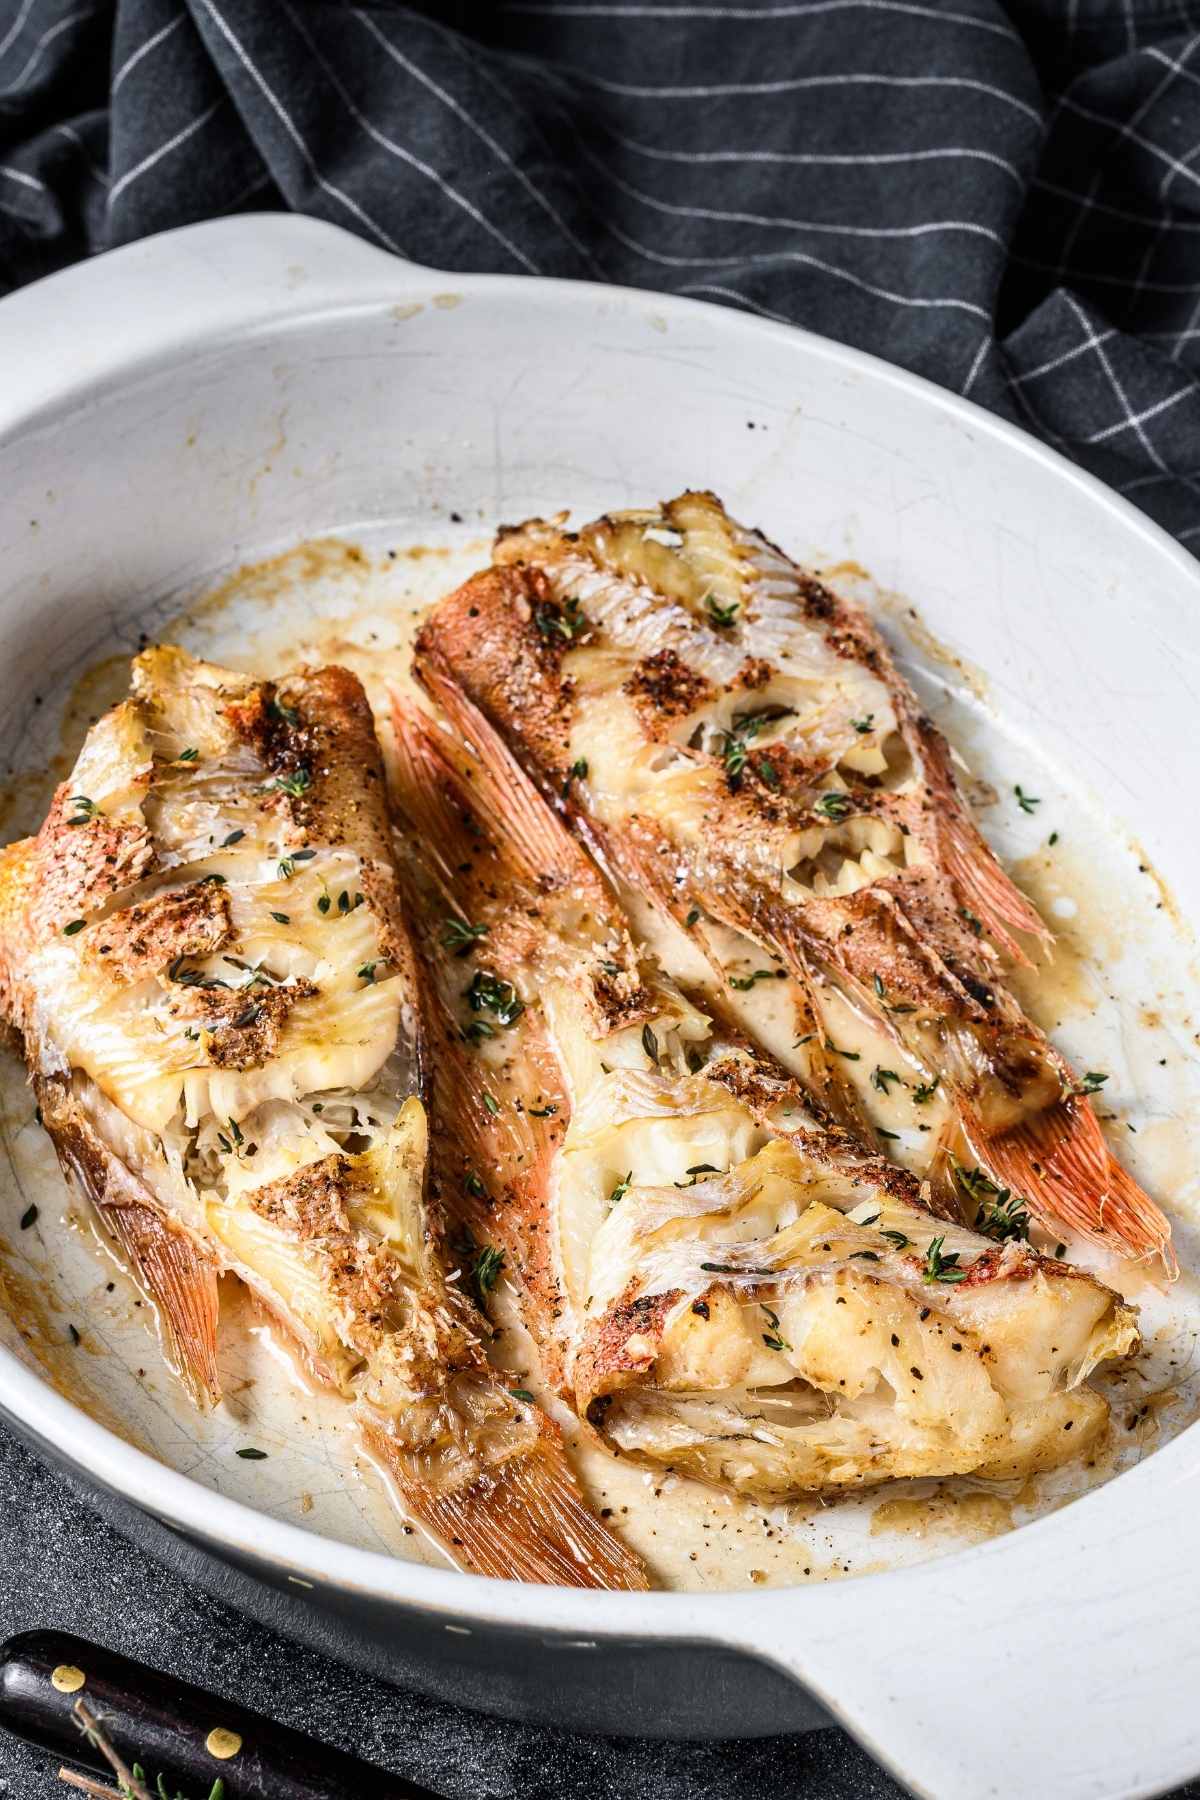 Red snapper is a versatile fish that can be enjoyed grilled, pan-fried, steamed, baked, or deep-fried. Our favorite way to cook snapper is to bake it with lemon, garlic, and butter. It cooks quickly, making it an ideal choice for busy weeknights.